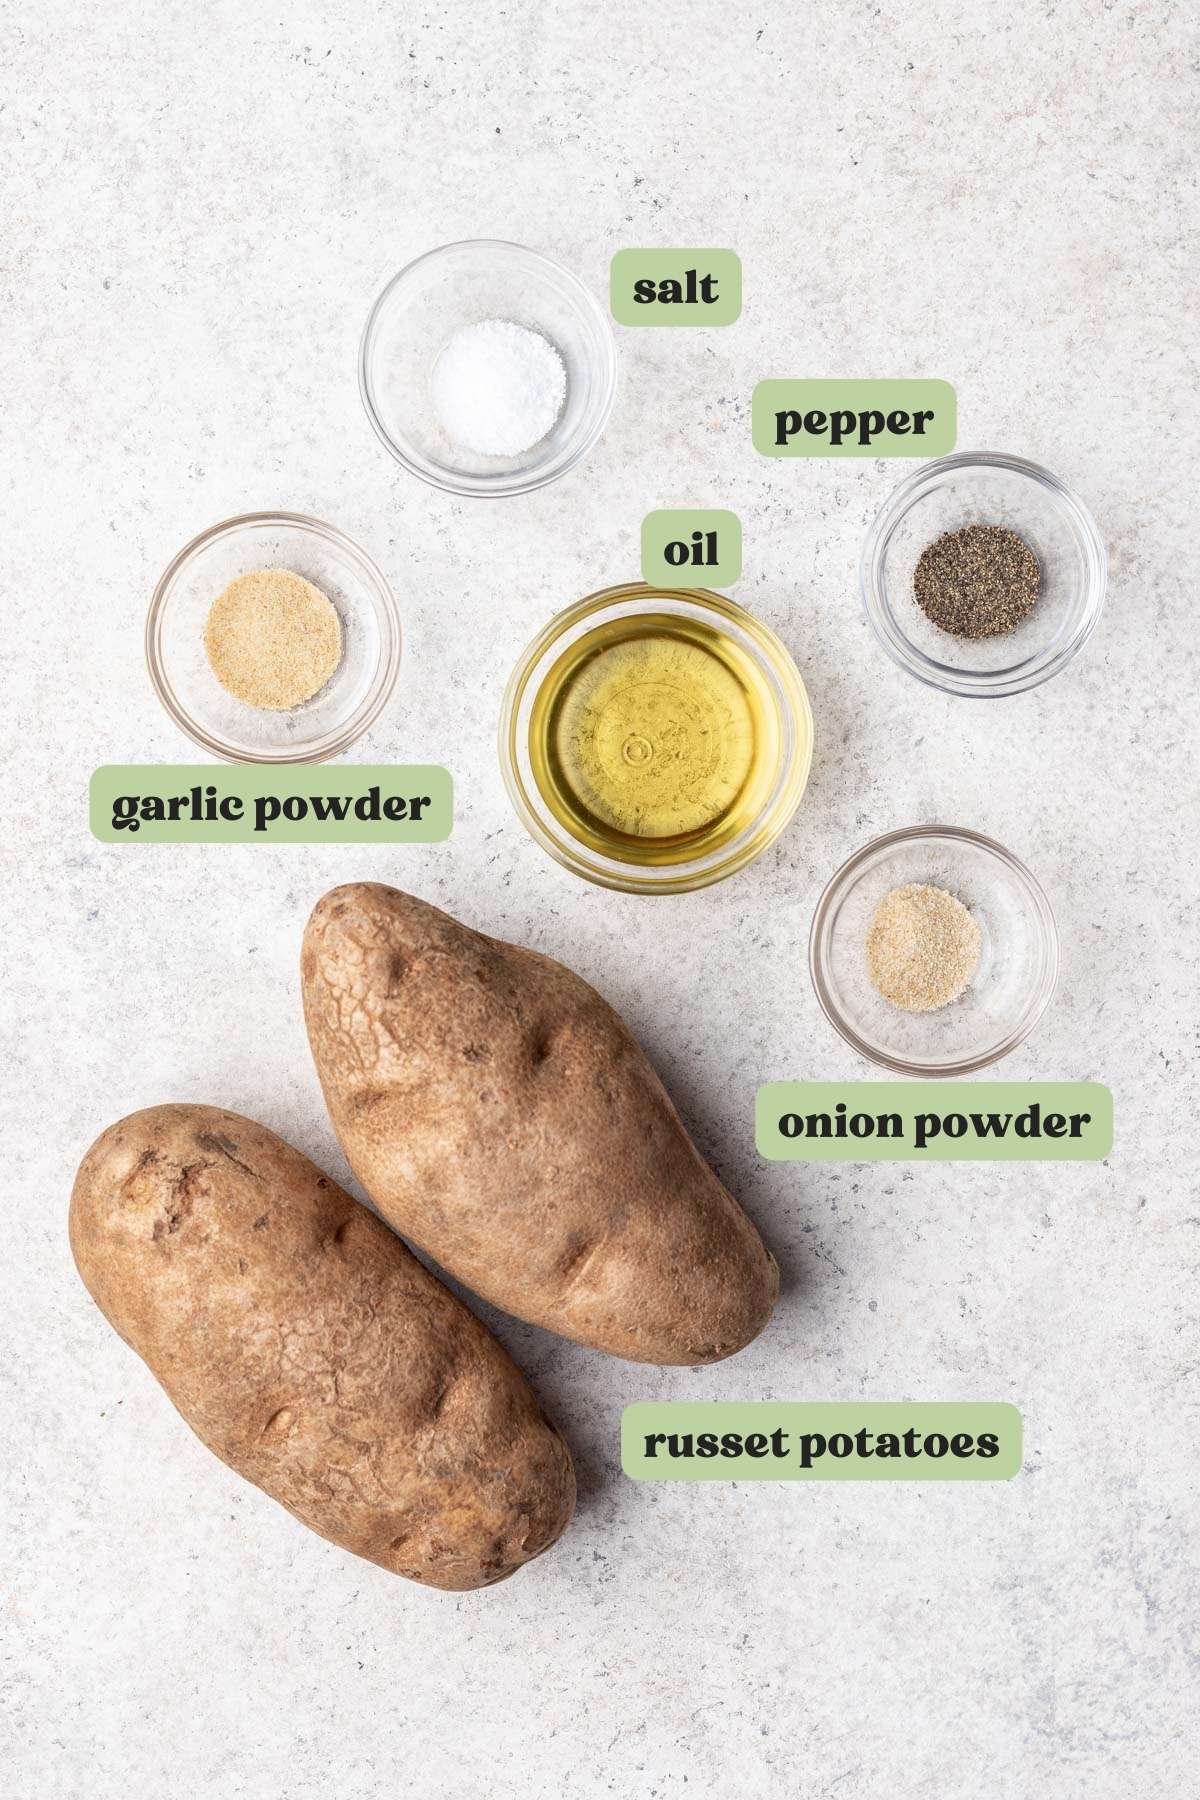 Ingredients you'll need for homemade hash browns measured and labeled.